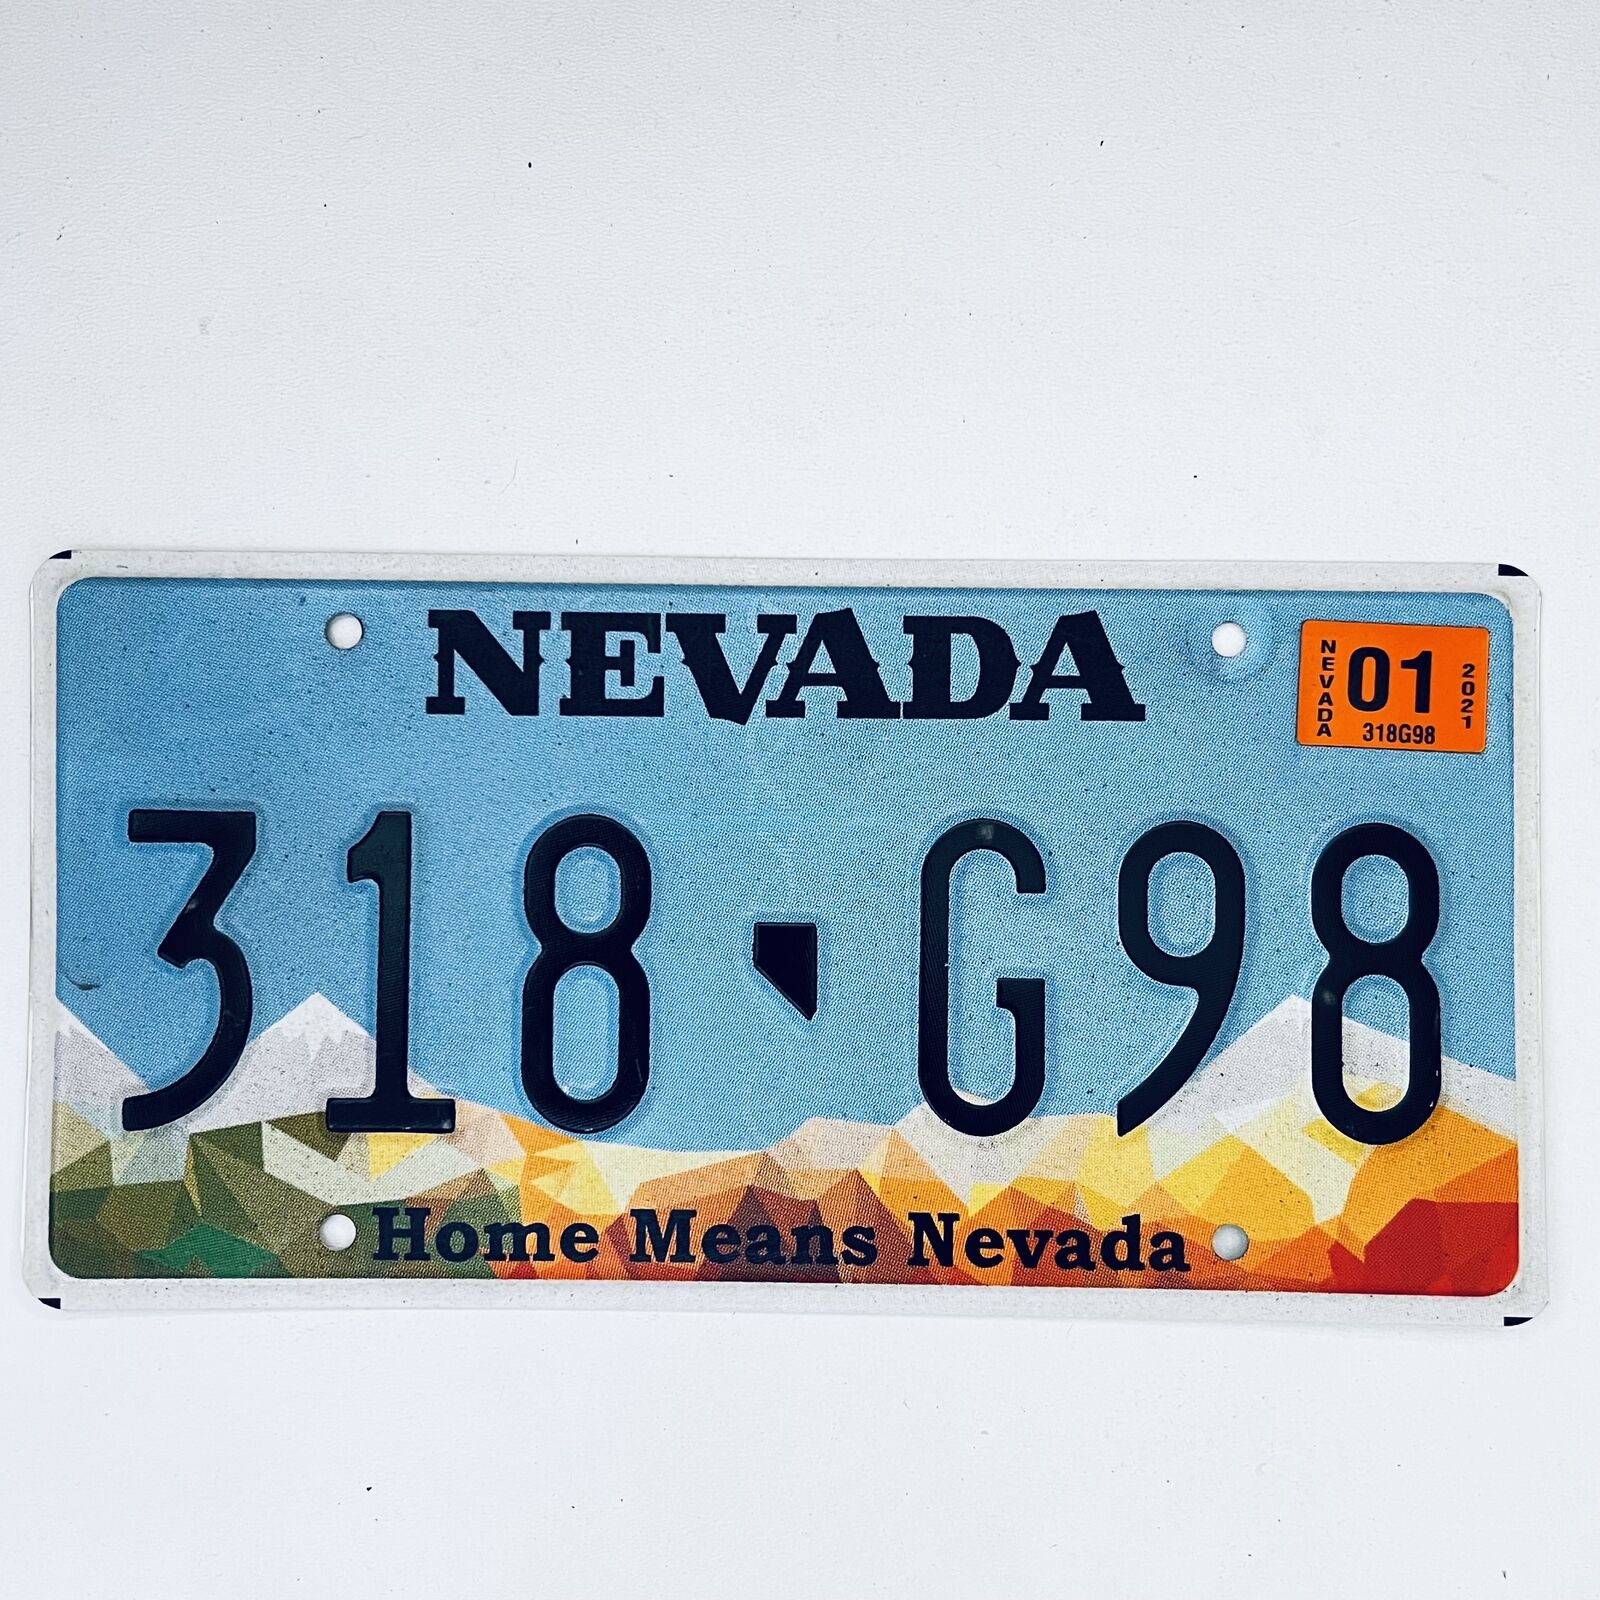 2021 United States Nevada Home Means Nevada Passenger License Plate 318 G98